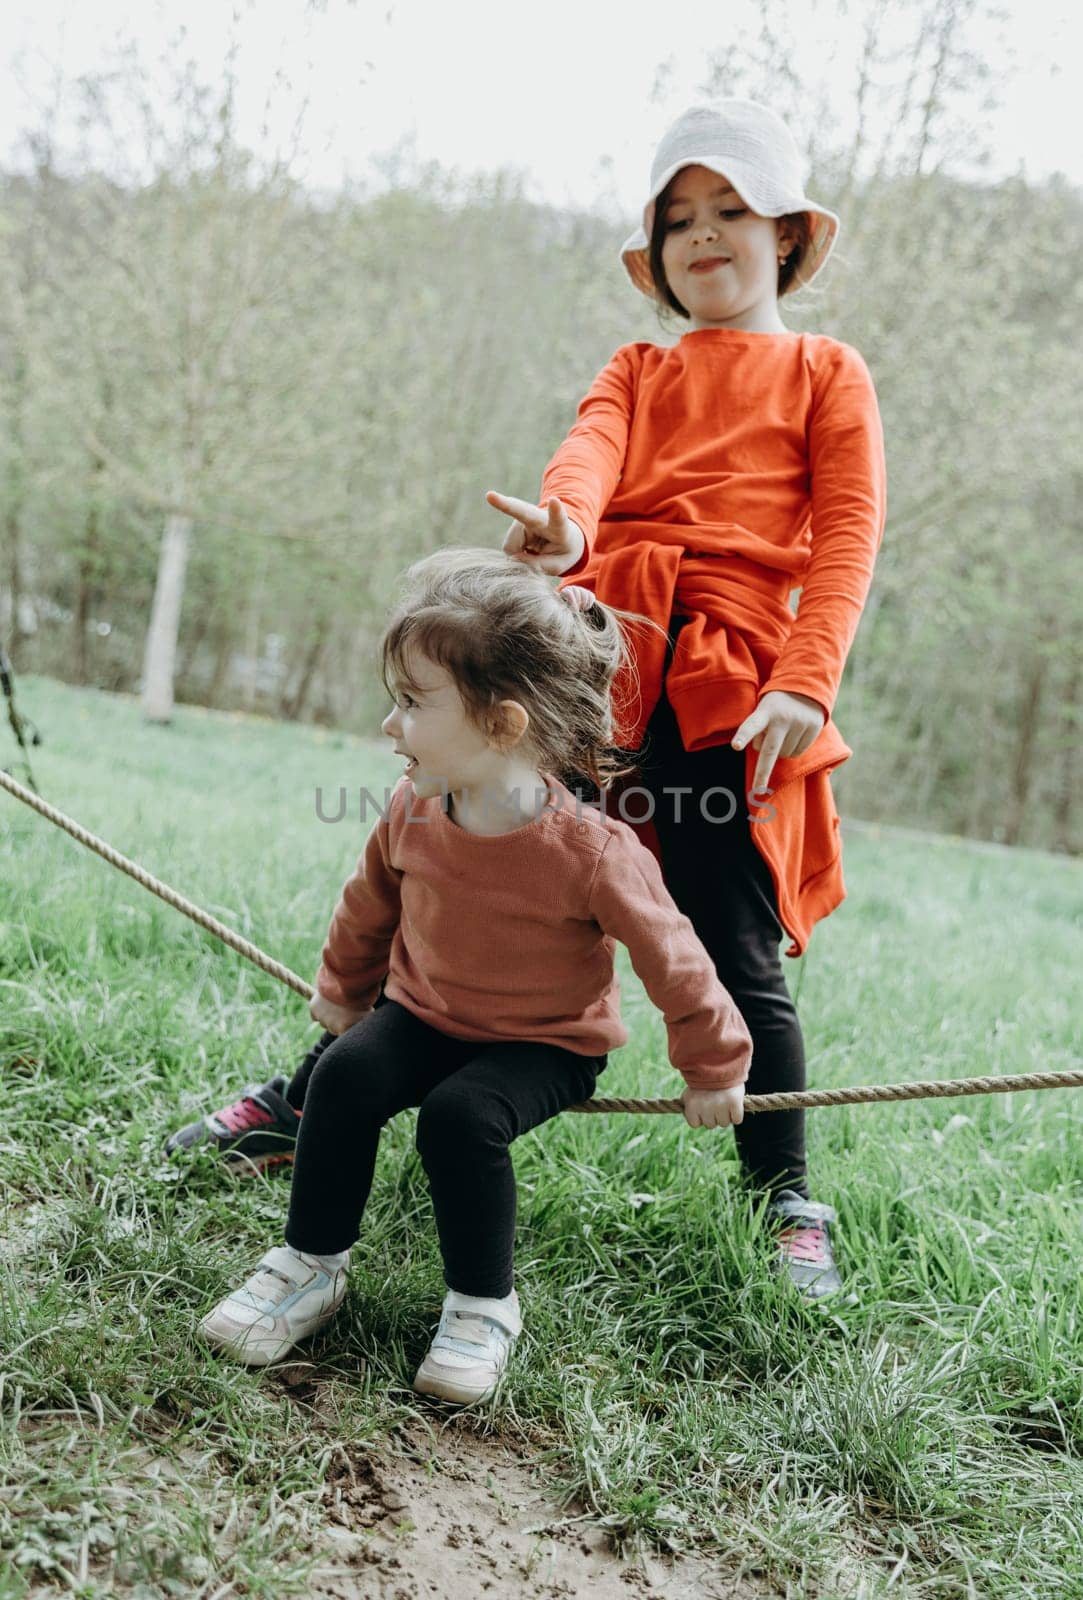 Portrait of two little beautiful Caucasian girls sisters having fun playing and fooling around with a rope on a spring day in a park in Belgium, close-up side view.